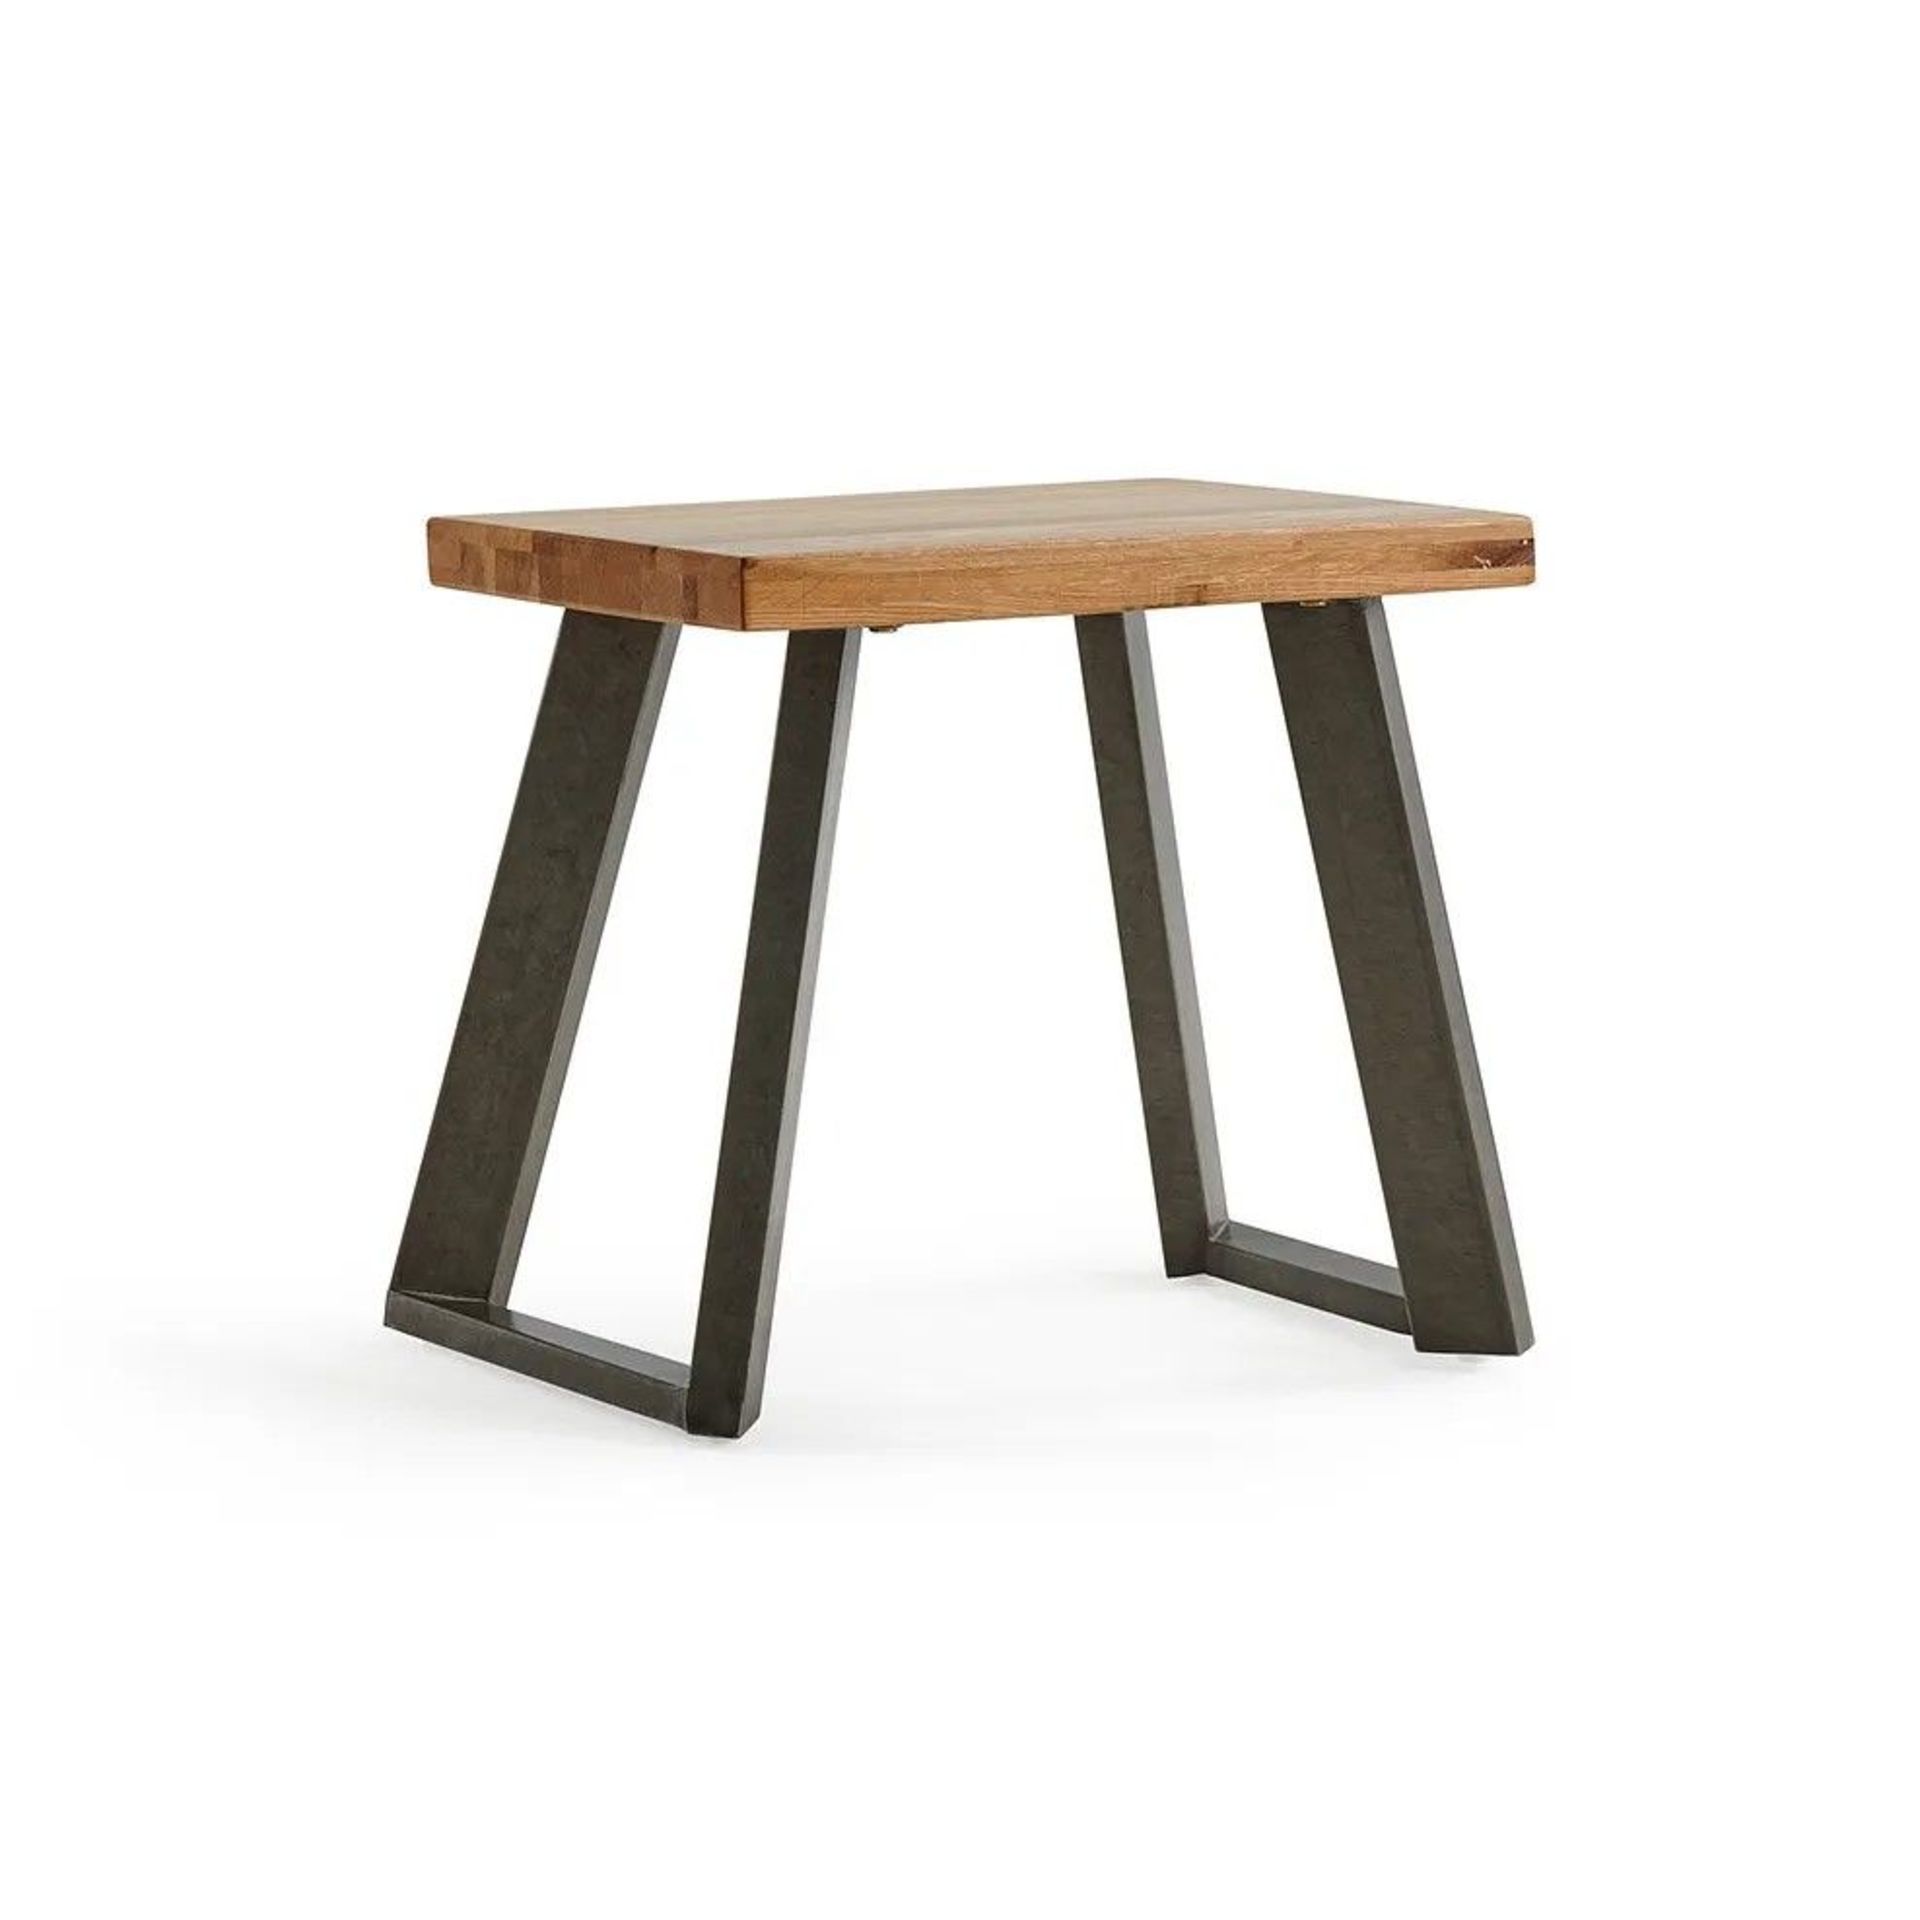 4 X NEW BOXED Cantelever Natural Solid Oak & Metal Stool. RRP £130 EACH, TOTAL RRP £520. For a